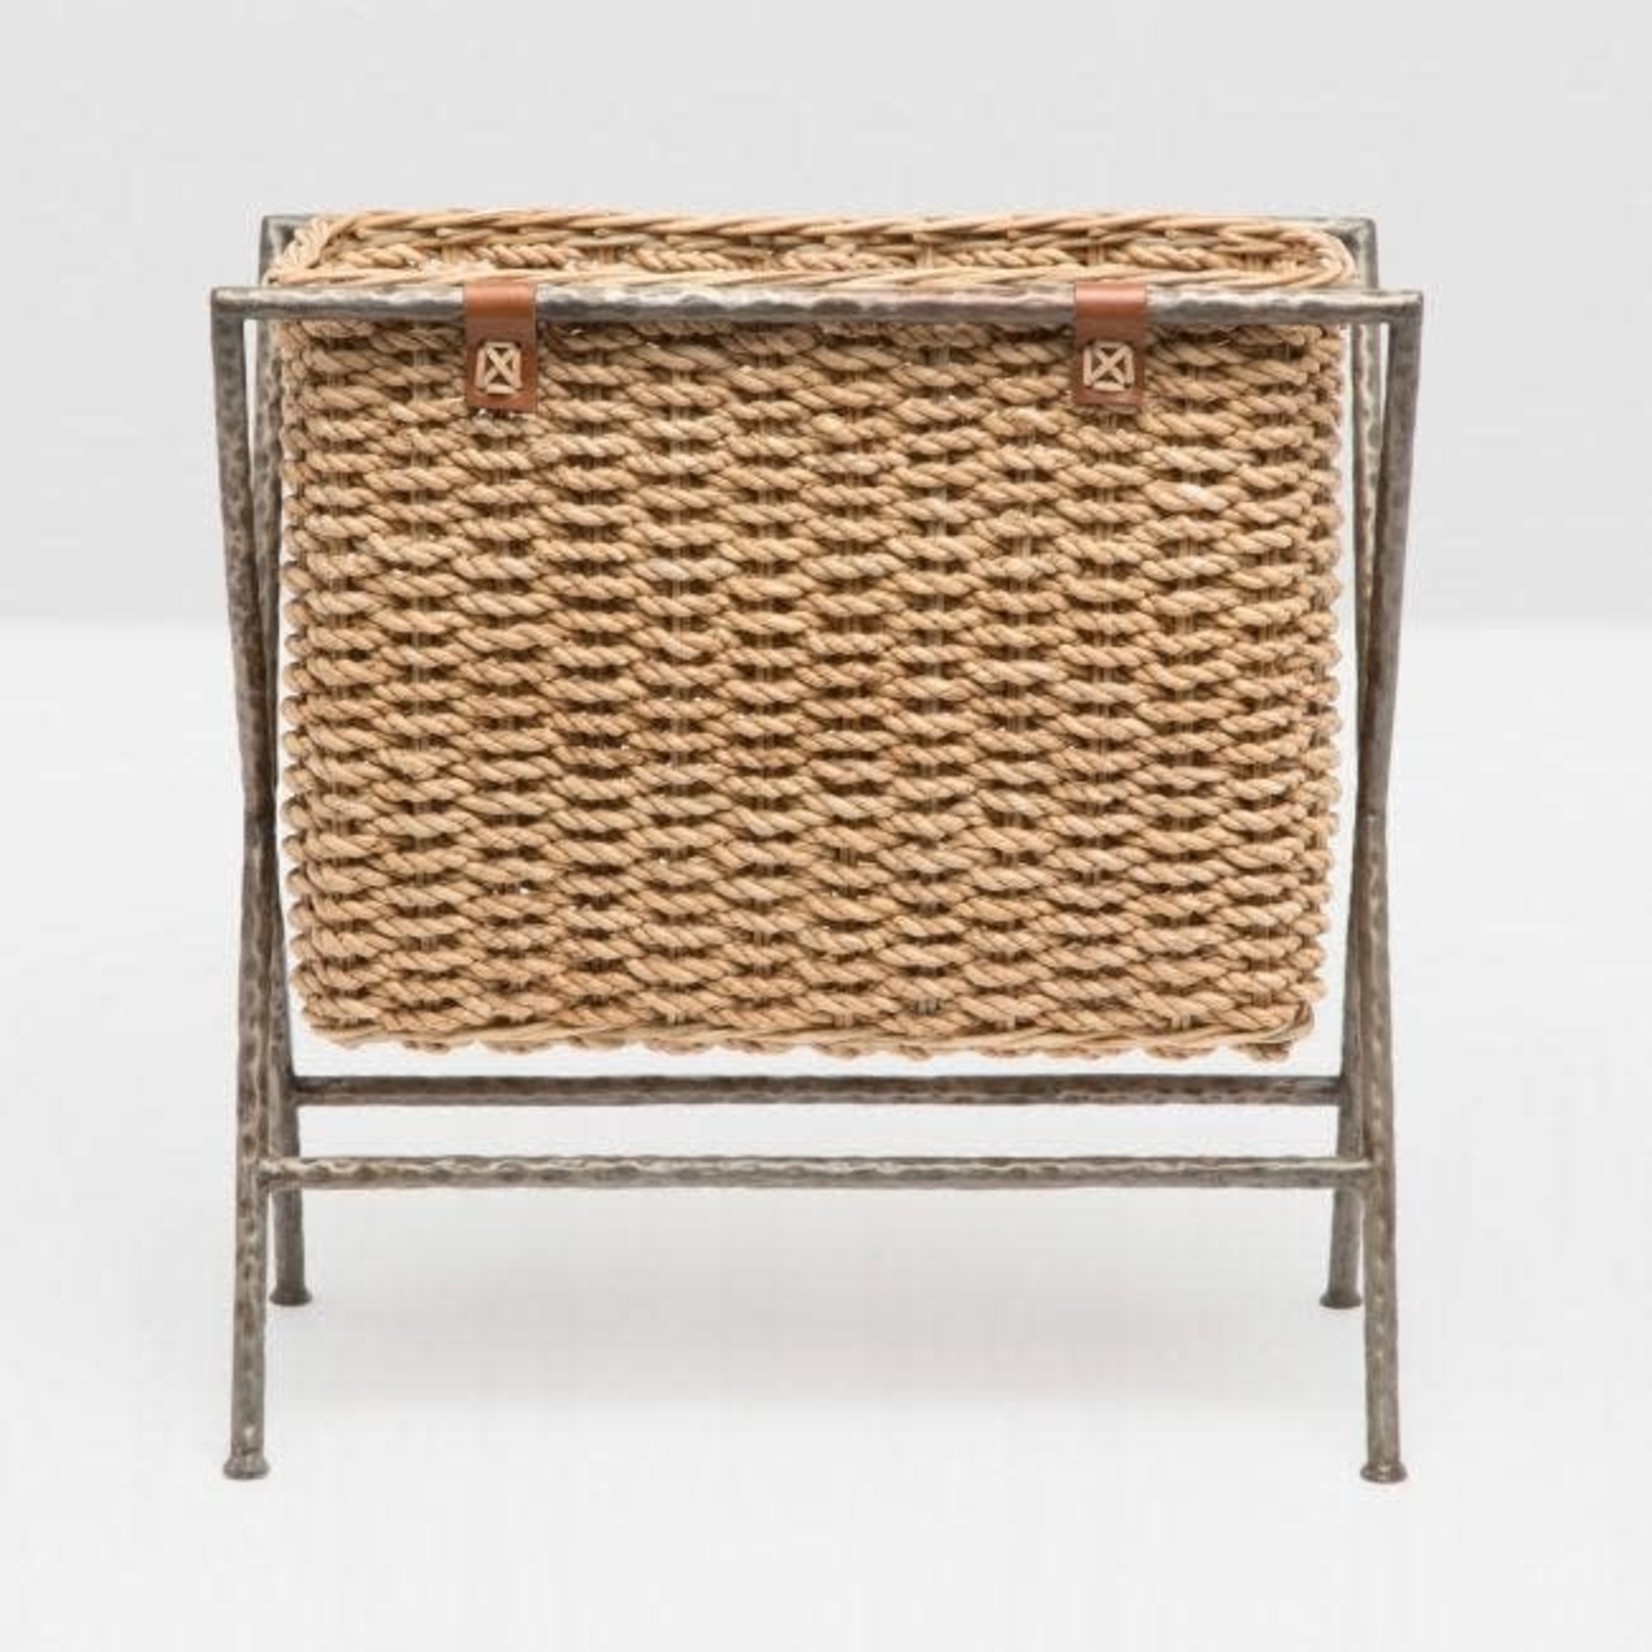 Pigeon and Poodle Hemley Natural Magazine Rack-Woven Seagrass